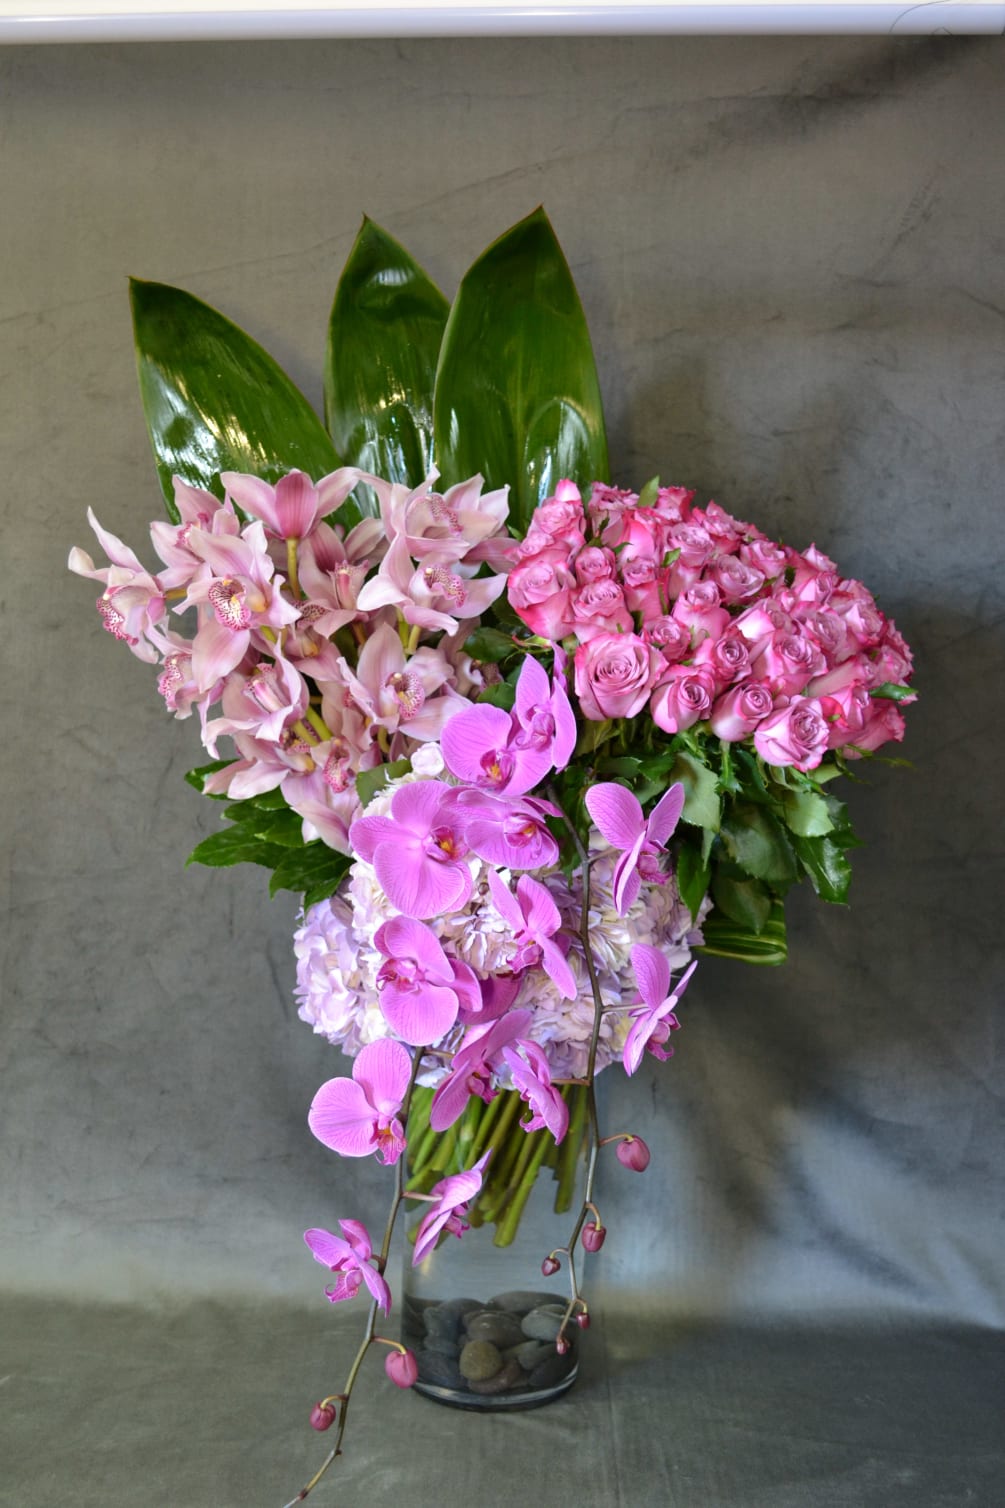 Roses, Hydrangeas, Cymbidium Orchids, Phalaenopsis Orchids. Perfectly combine and arranged in a